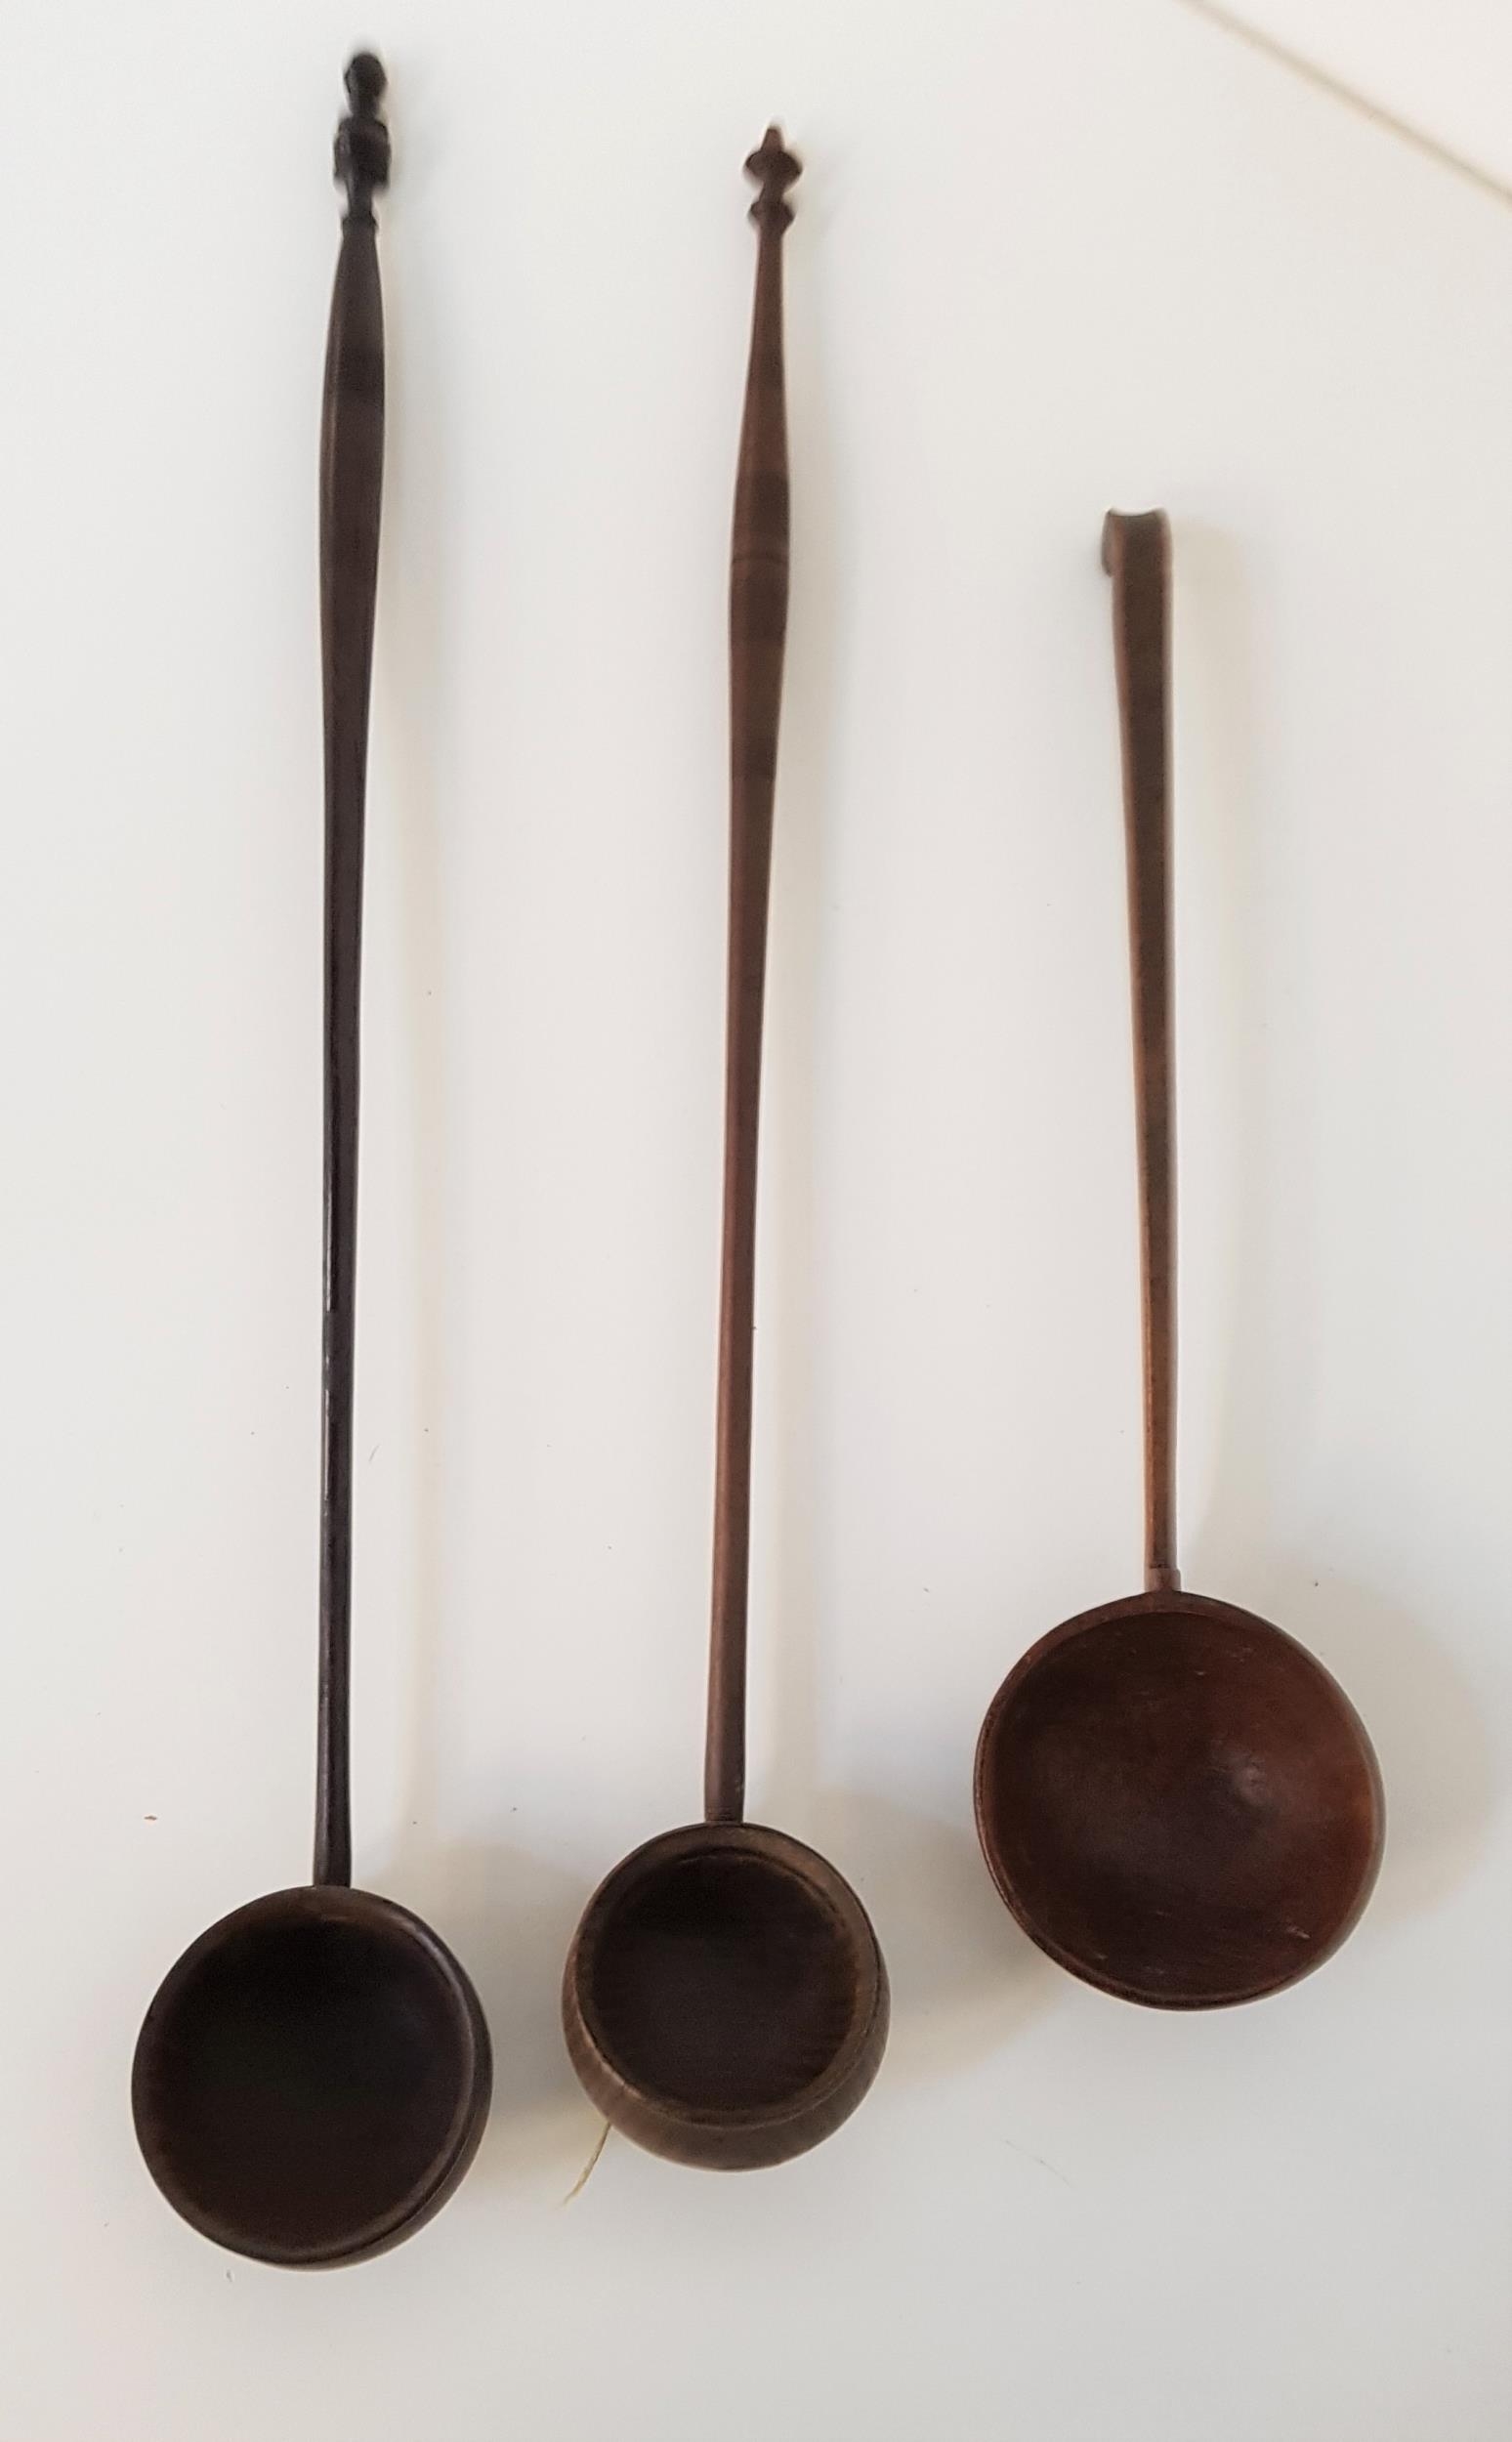 LATE 18th CENTURY TREEN LADLE with a shaped handle and deep circular bowl, 29cm long, together